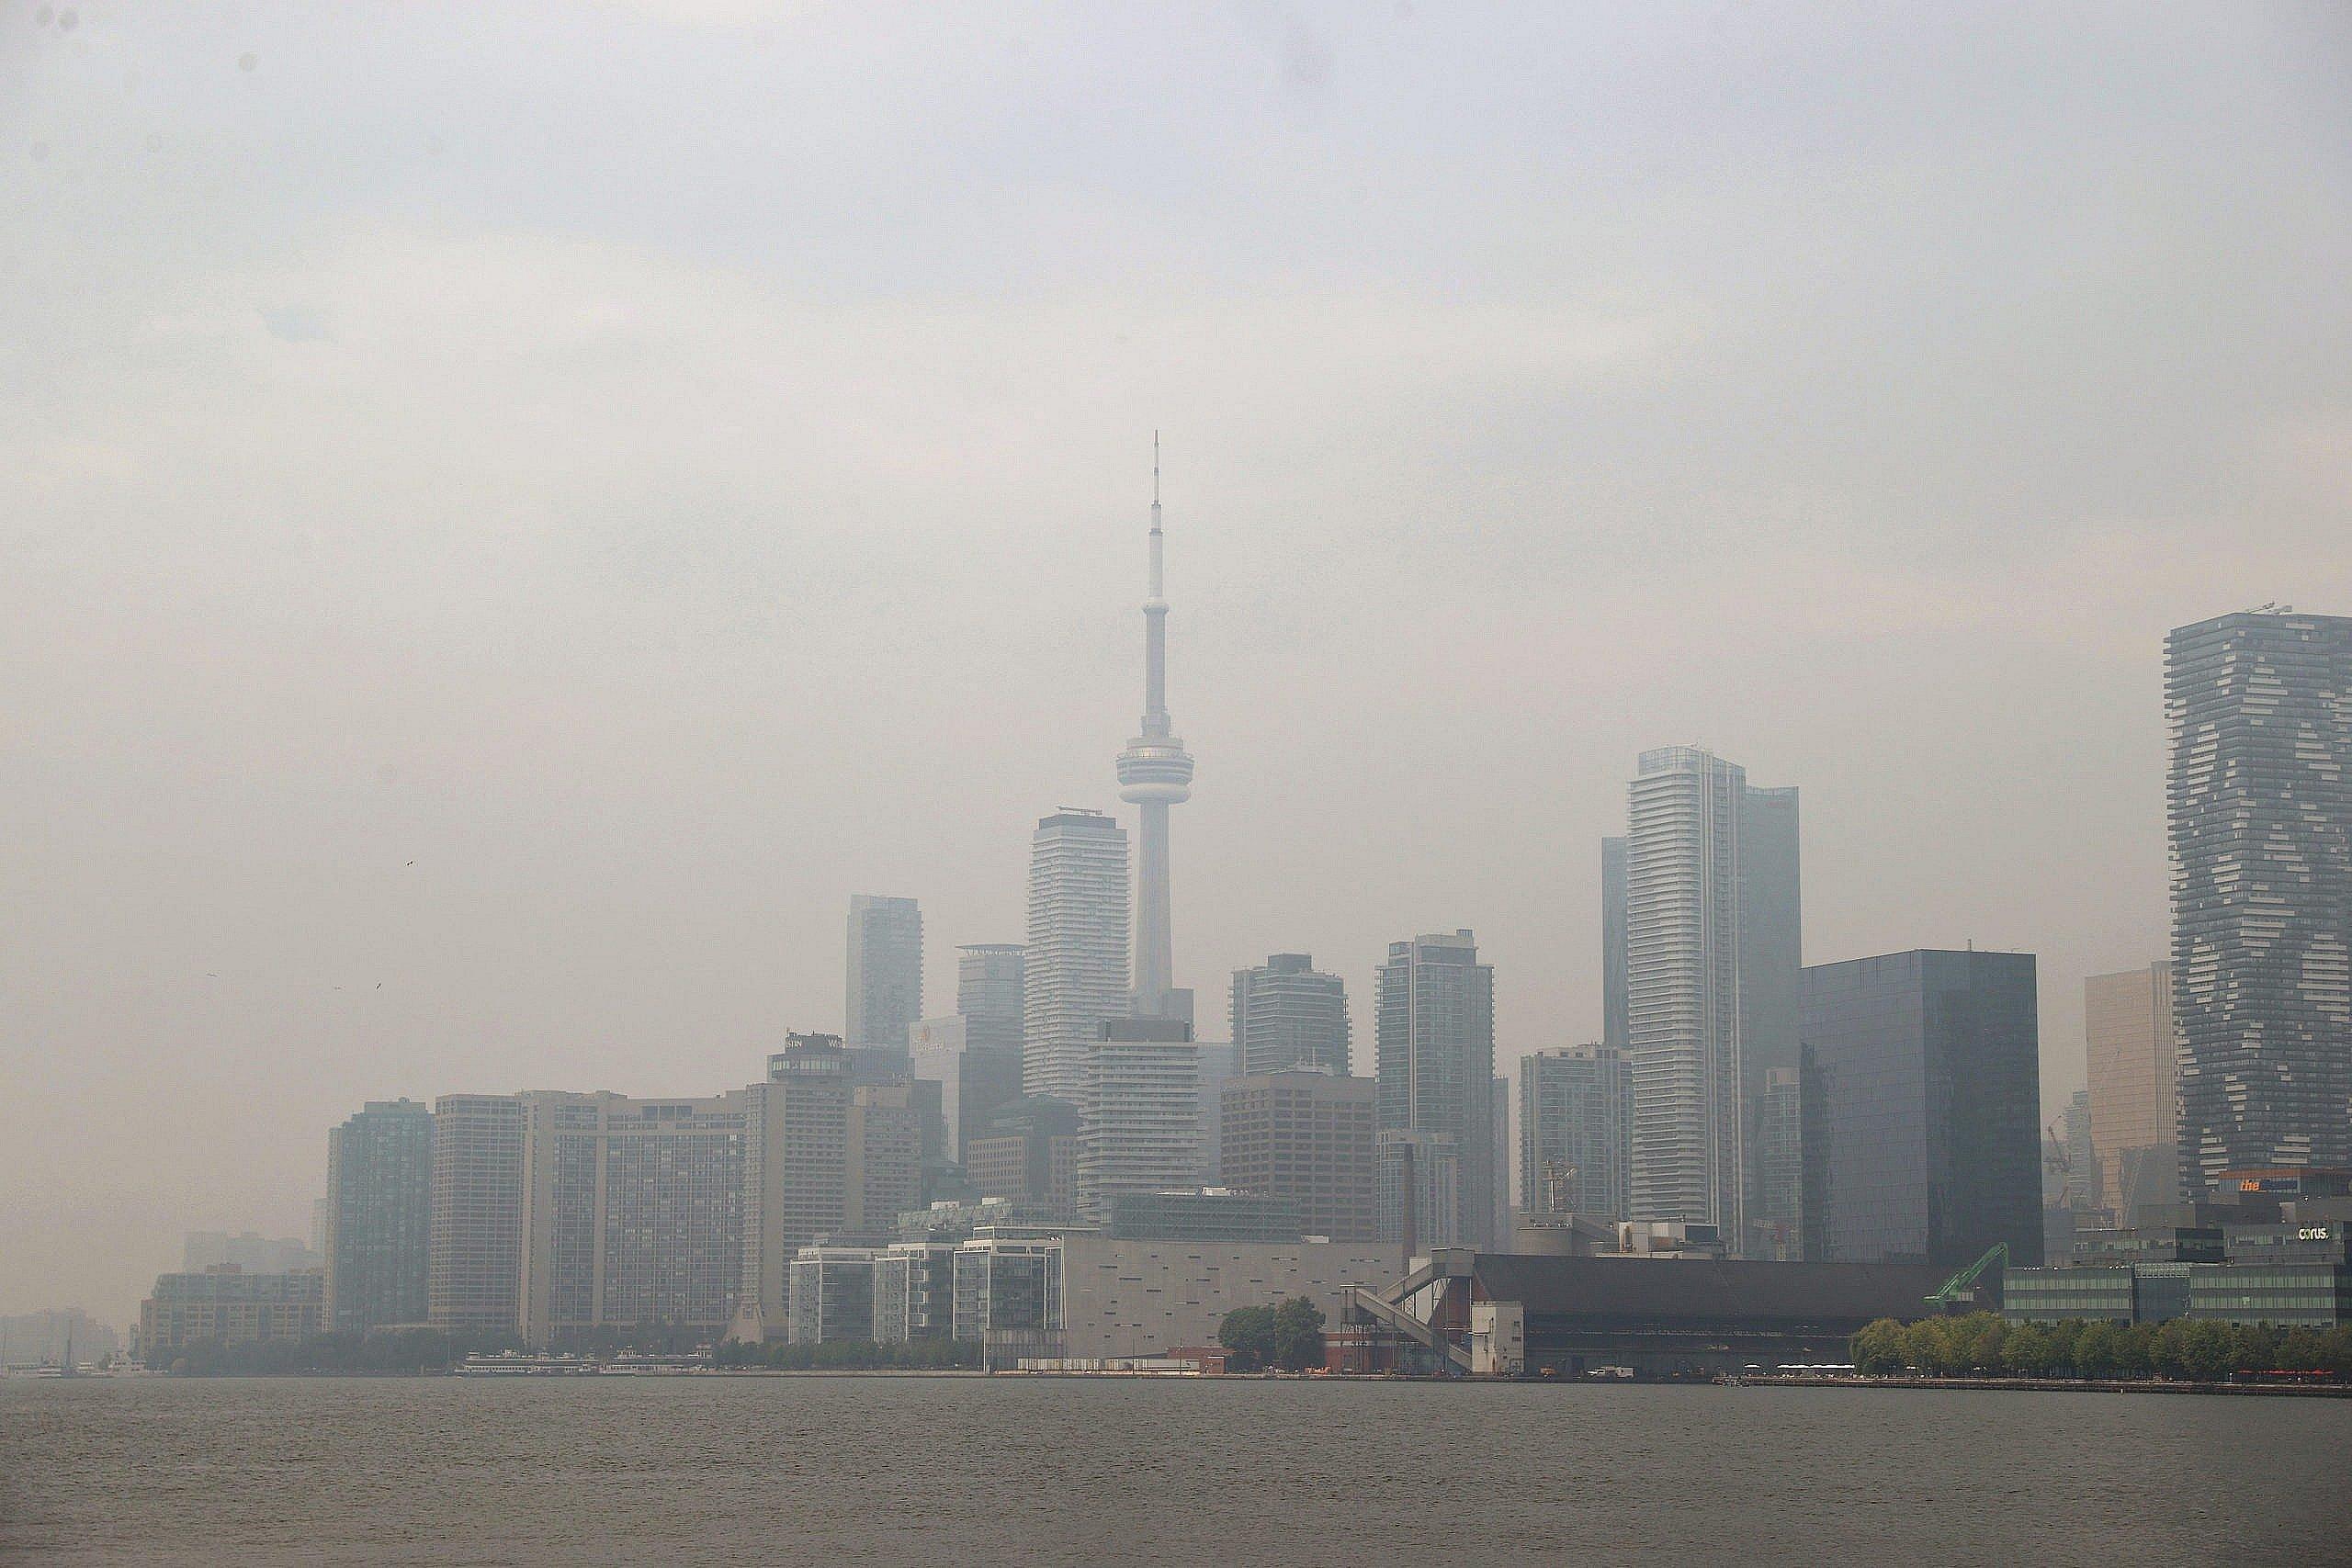 Ontario: The Toronto skyline was clouded in smoke one afternoon last June. In 2060, as larger swaths of Canadaâs boreal fires burn, the plumes of toxic smoke produced are likely to become a more regular feature of summertime life in the urban south.